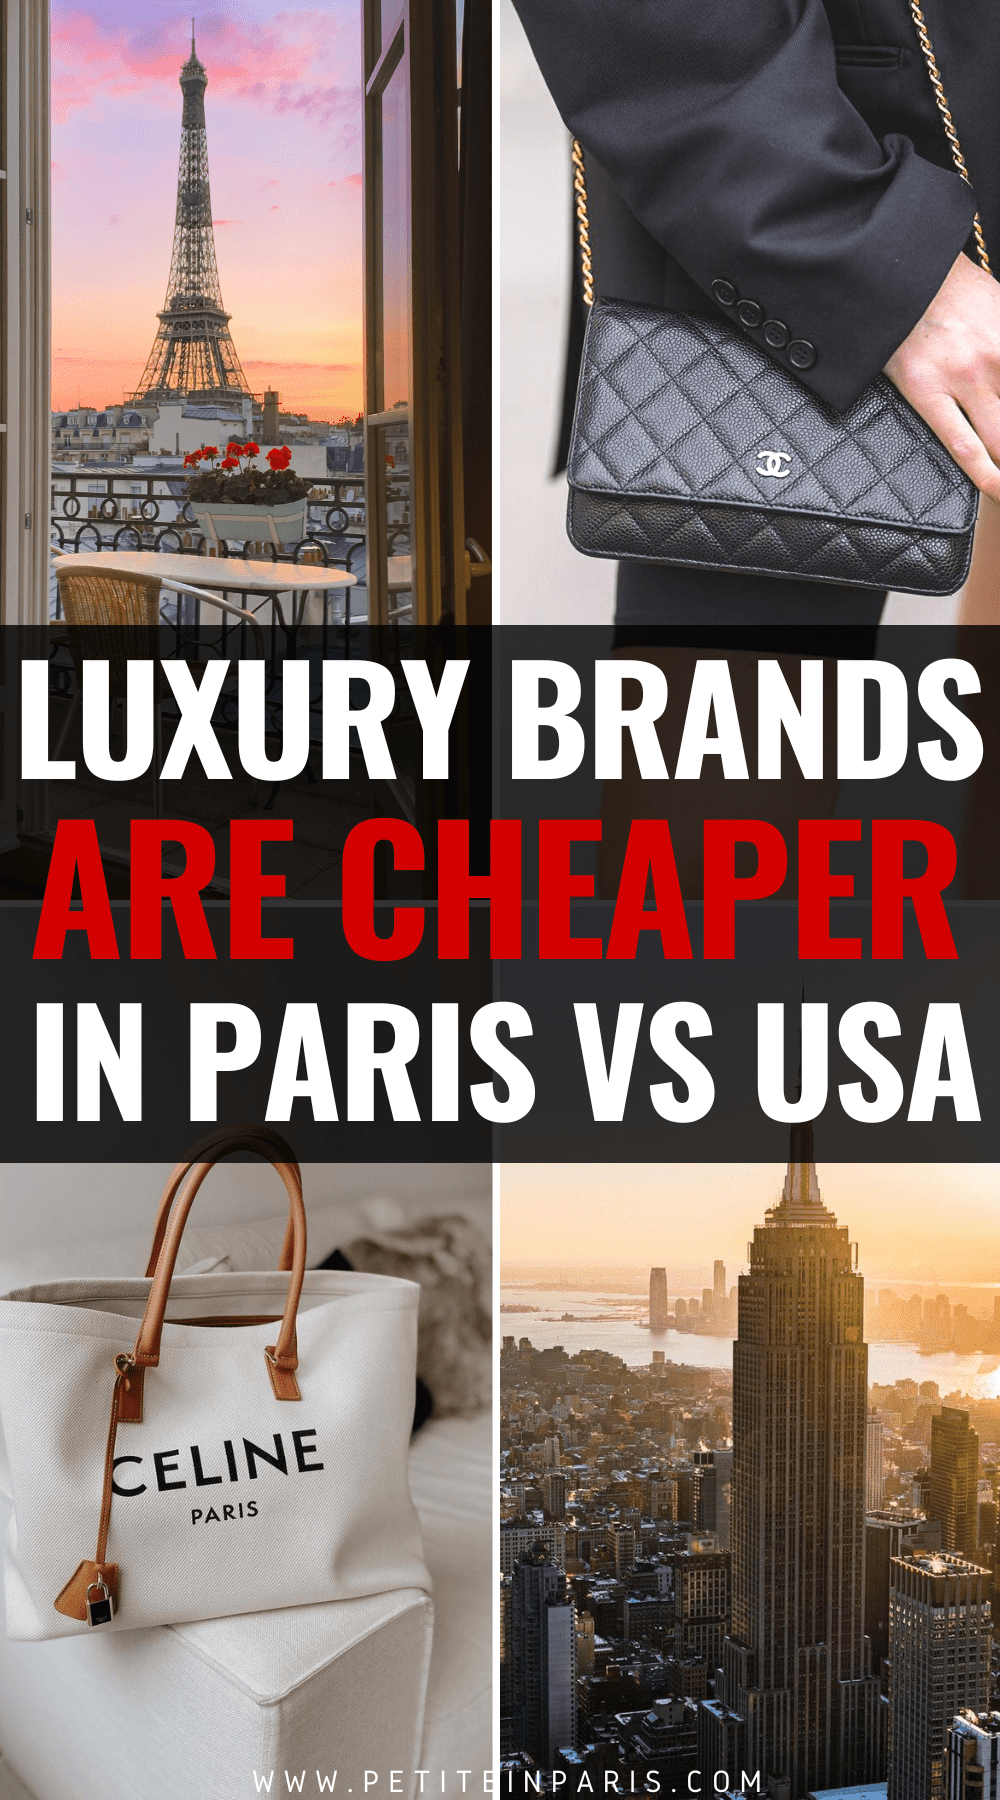 How to Save Money While Shopping in Paris